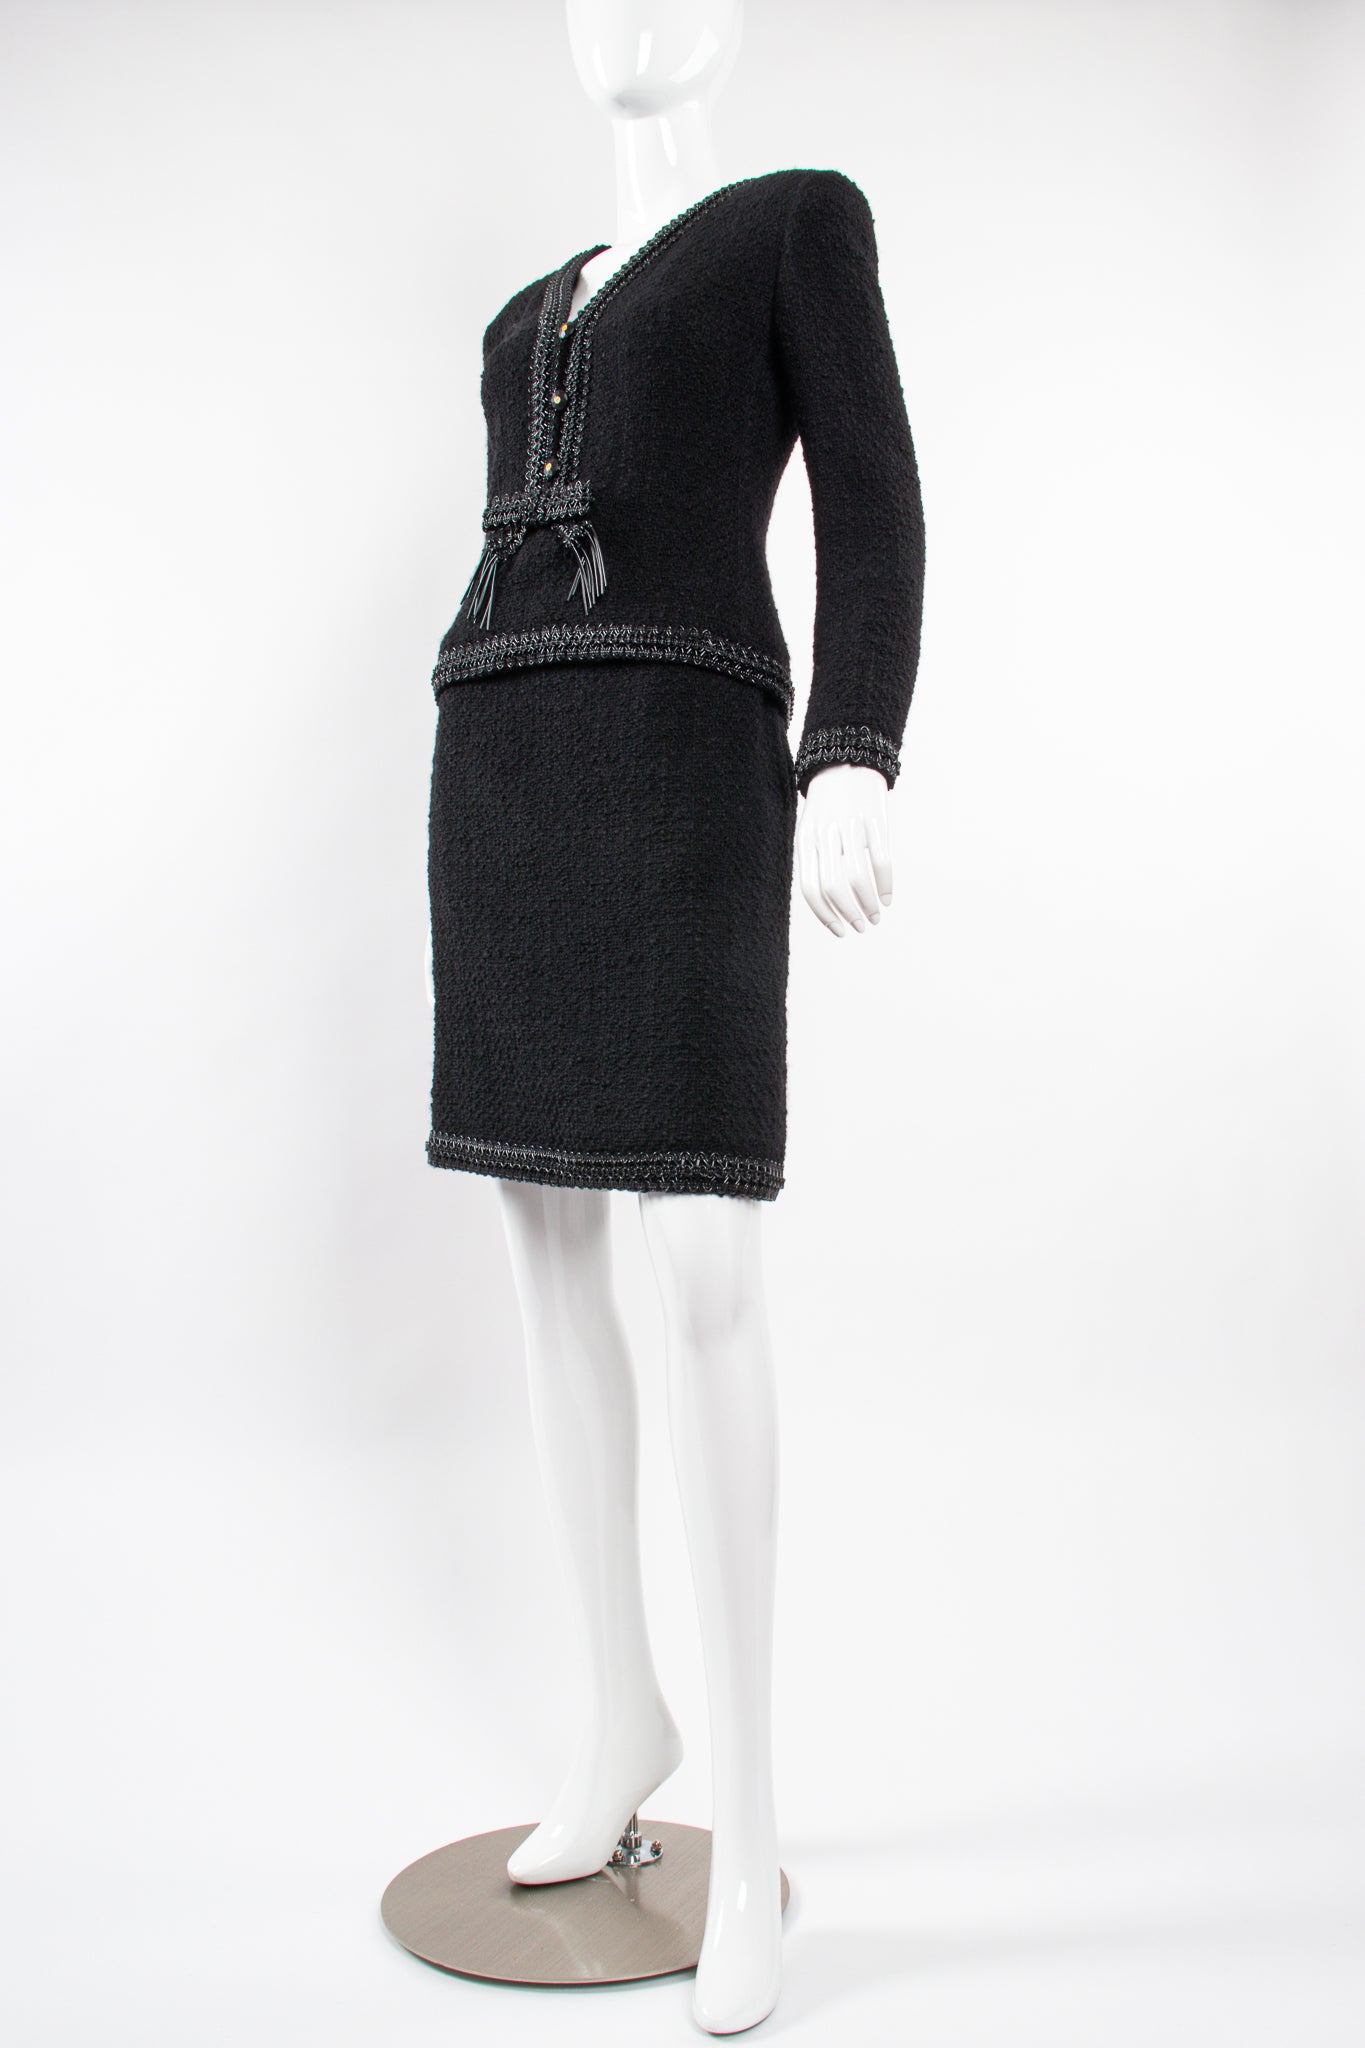 Vintage Chanel SS 1994 Runway Jelly Bow Bouclé Jacket & Skirt Set on Mannequin angle @ Recess LA